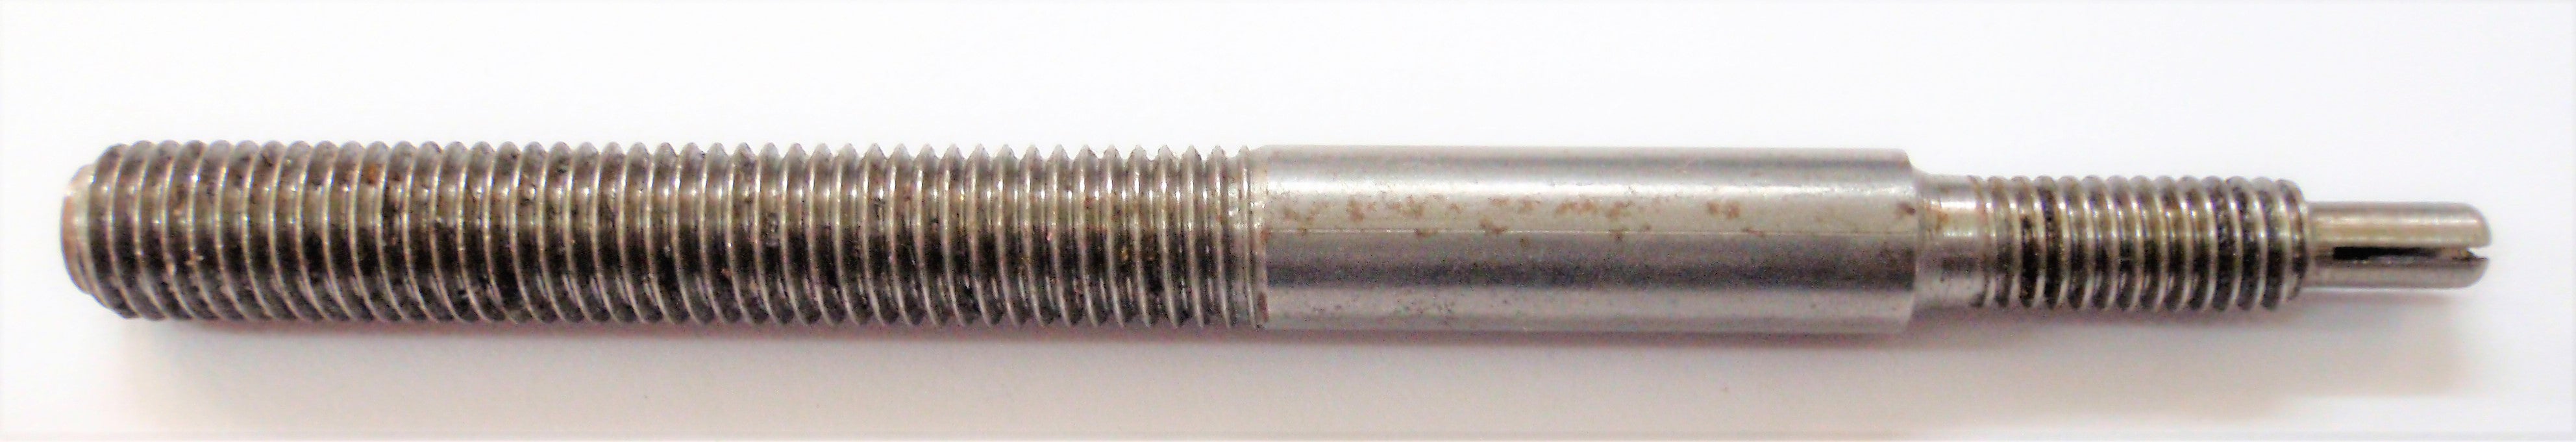 Simplex Master Decapping Rod Shaft Only Large Diameter 82mm (SPART1813)